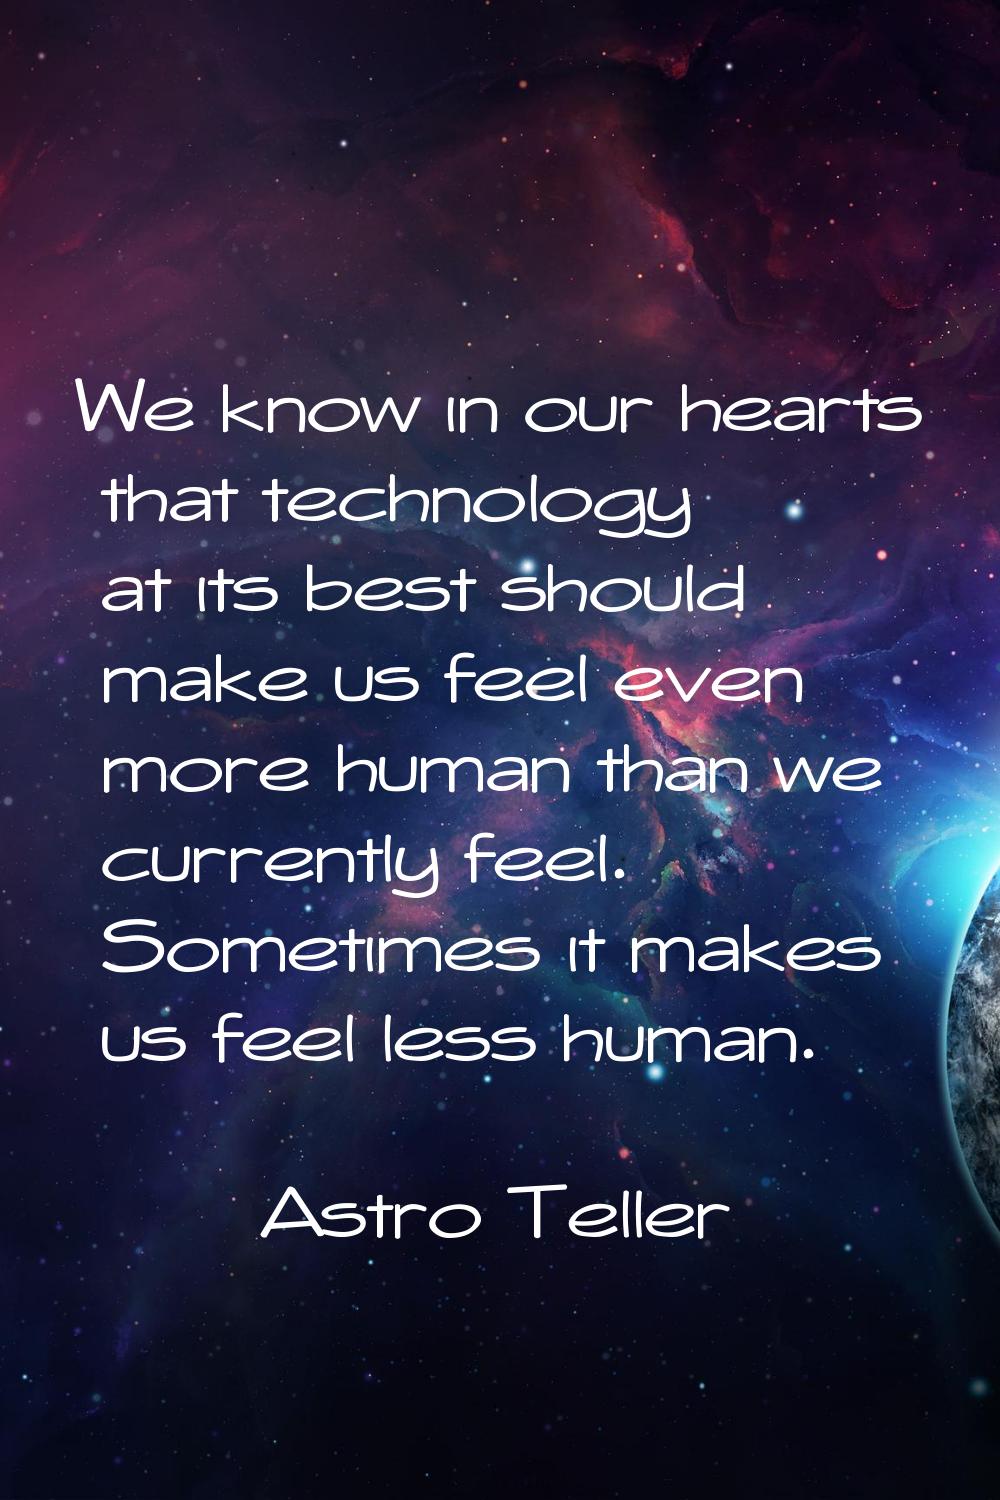 We know in our hearts that technology at its best should make us feel even more human than we curre